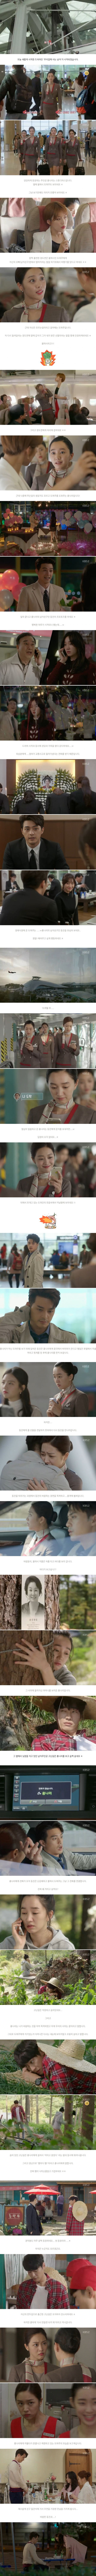 episode 1 captures for the Korean drama 'The Man In My House'